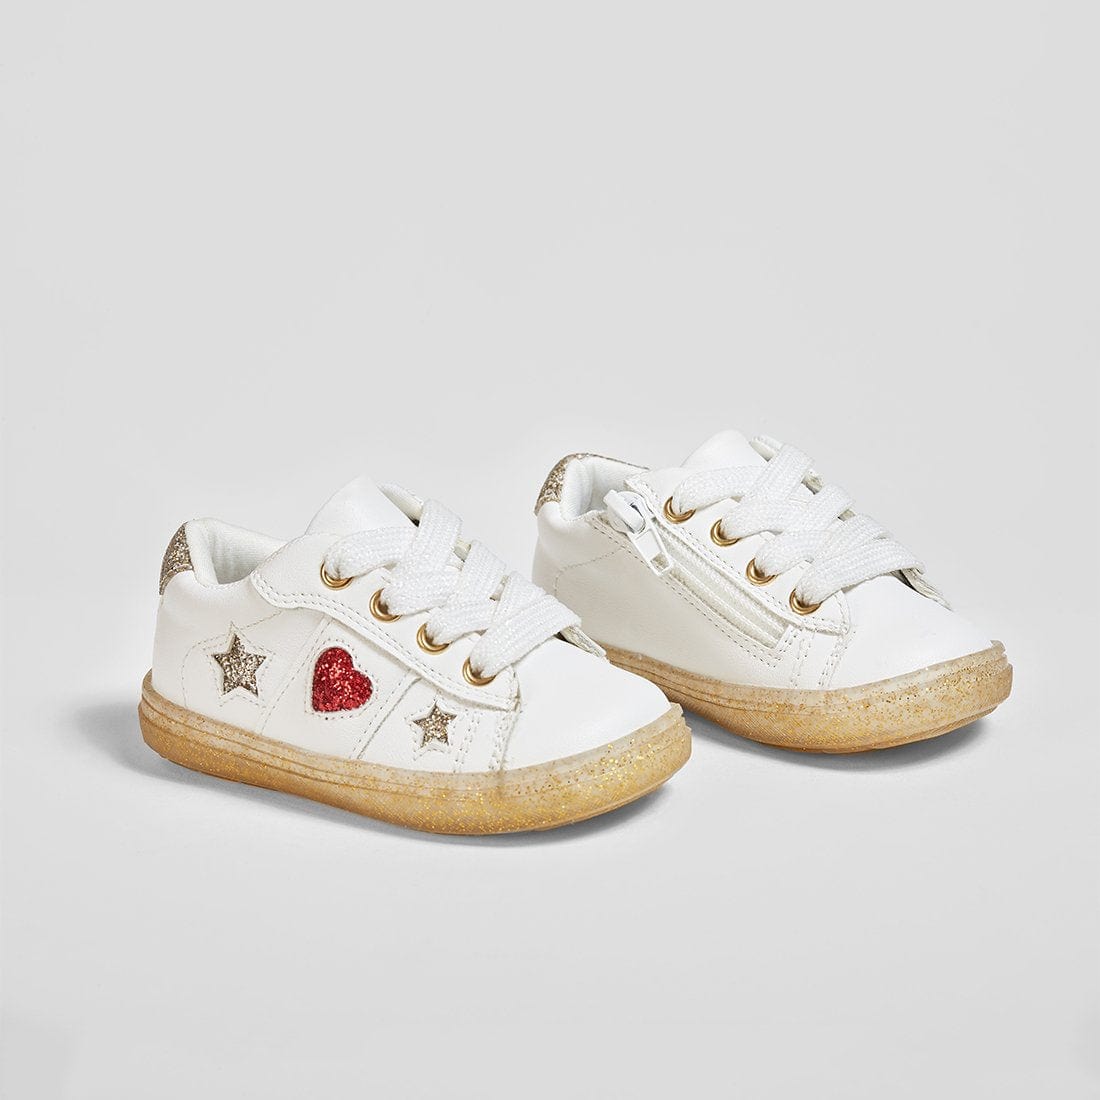 OSITO Shoes Baby's "Heart and Stars" White Sneakers